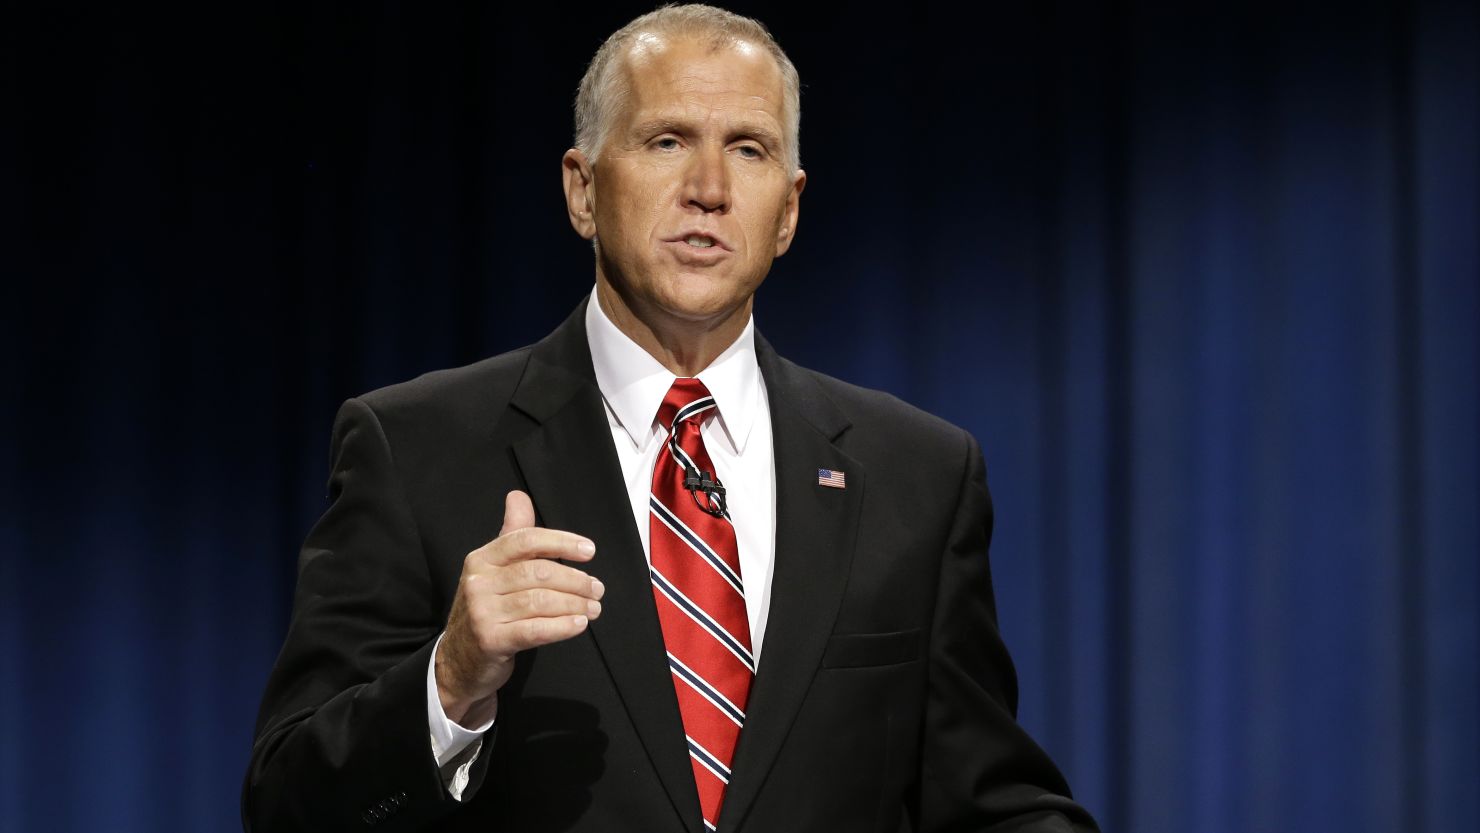 North Carolina Republican Senate candidate Thom Tillis makes a comment during a live televised debate with Sen. Kay Hagan, D-N.C., at UNC-TV studios in Research Triangle Park, N.C., Tuesday, Oct. 7, 2014. 